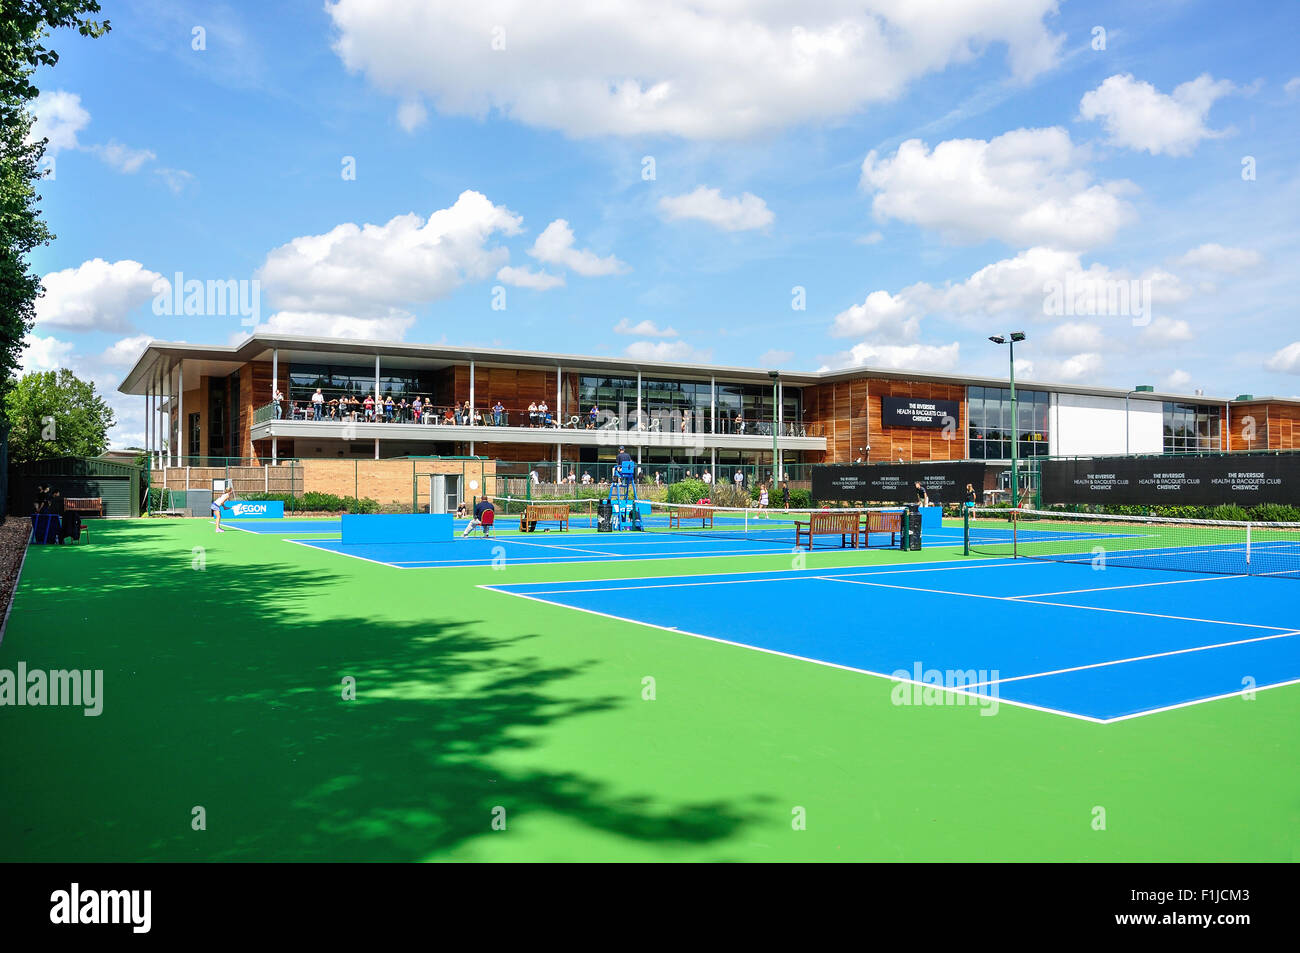 Tennis courts at The Riverside Health & Rackets Club Chiswick, Borough of Hounslow, Greater London, England, United Kingdom Stock Photo